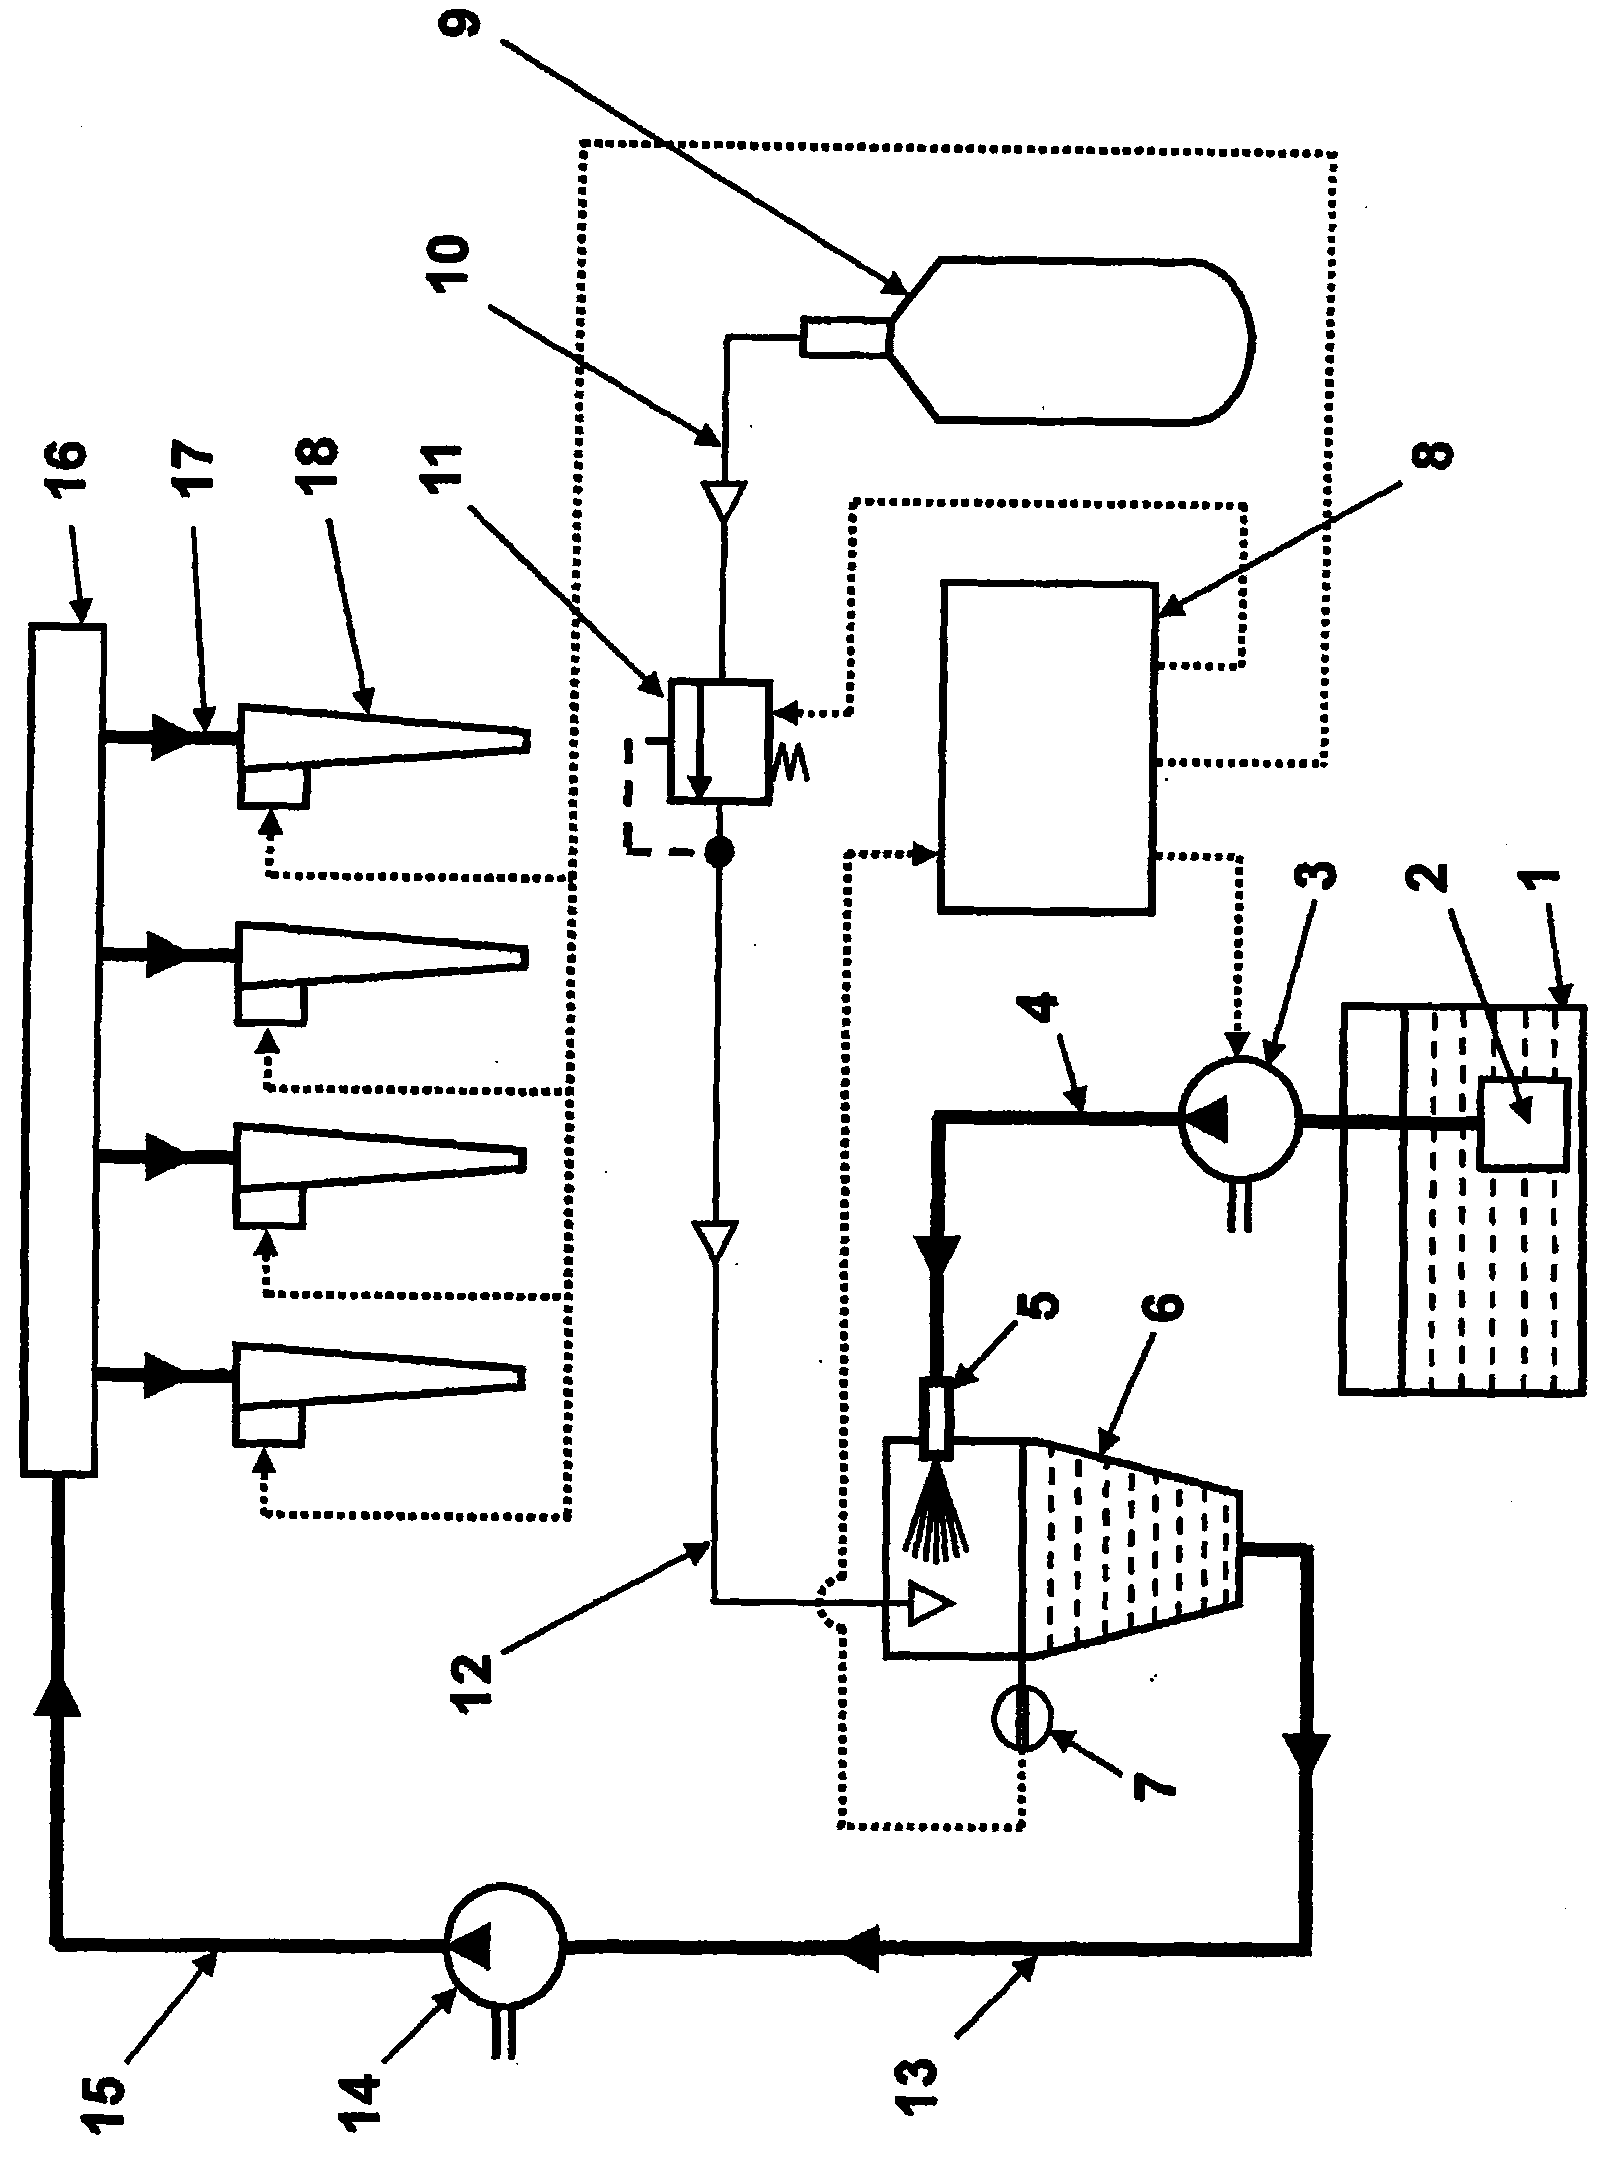 Method and system for liquid fuel conditioning